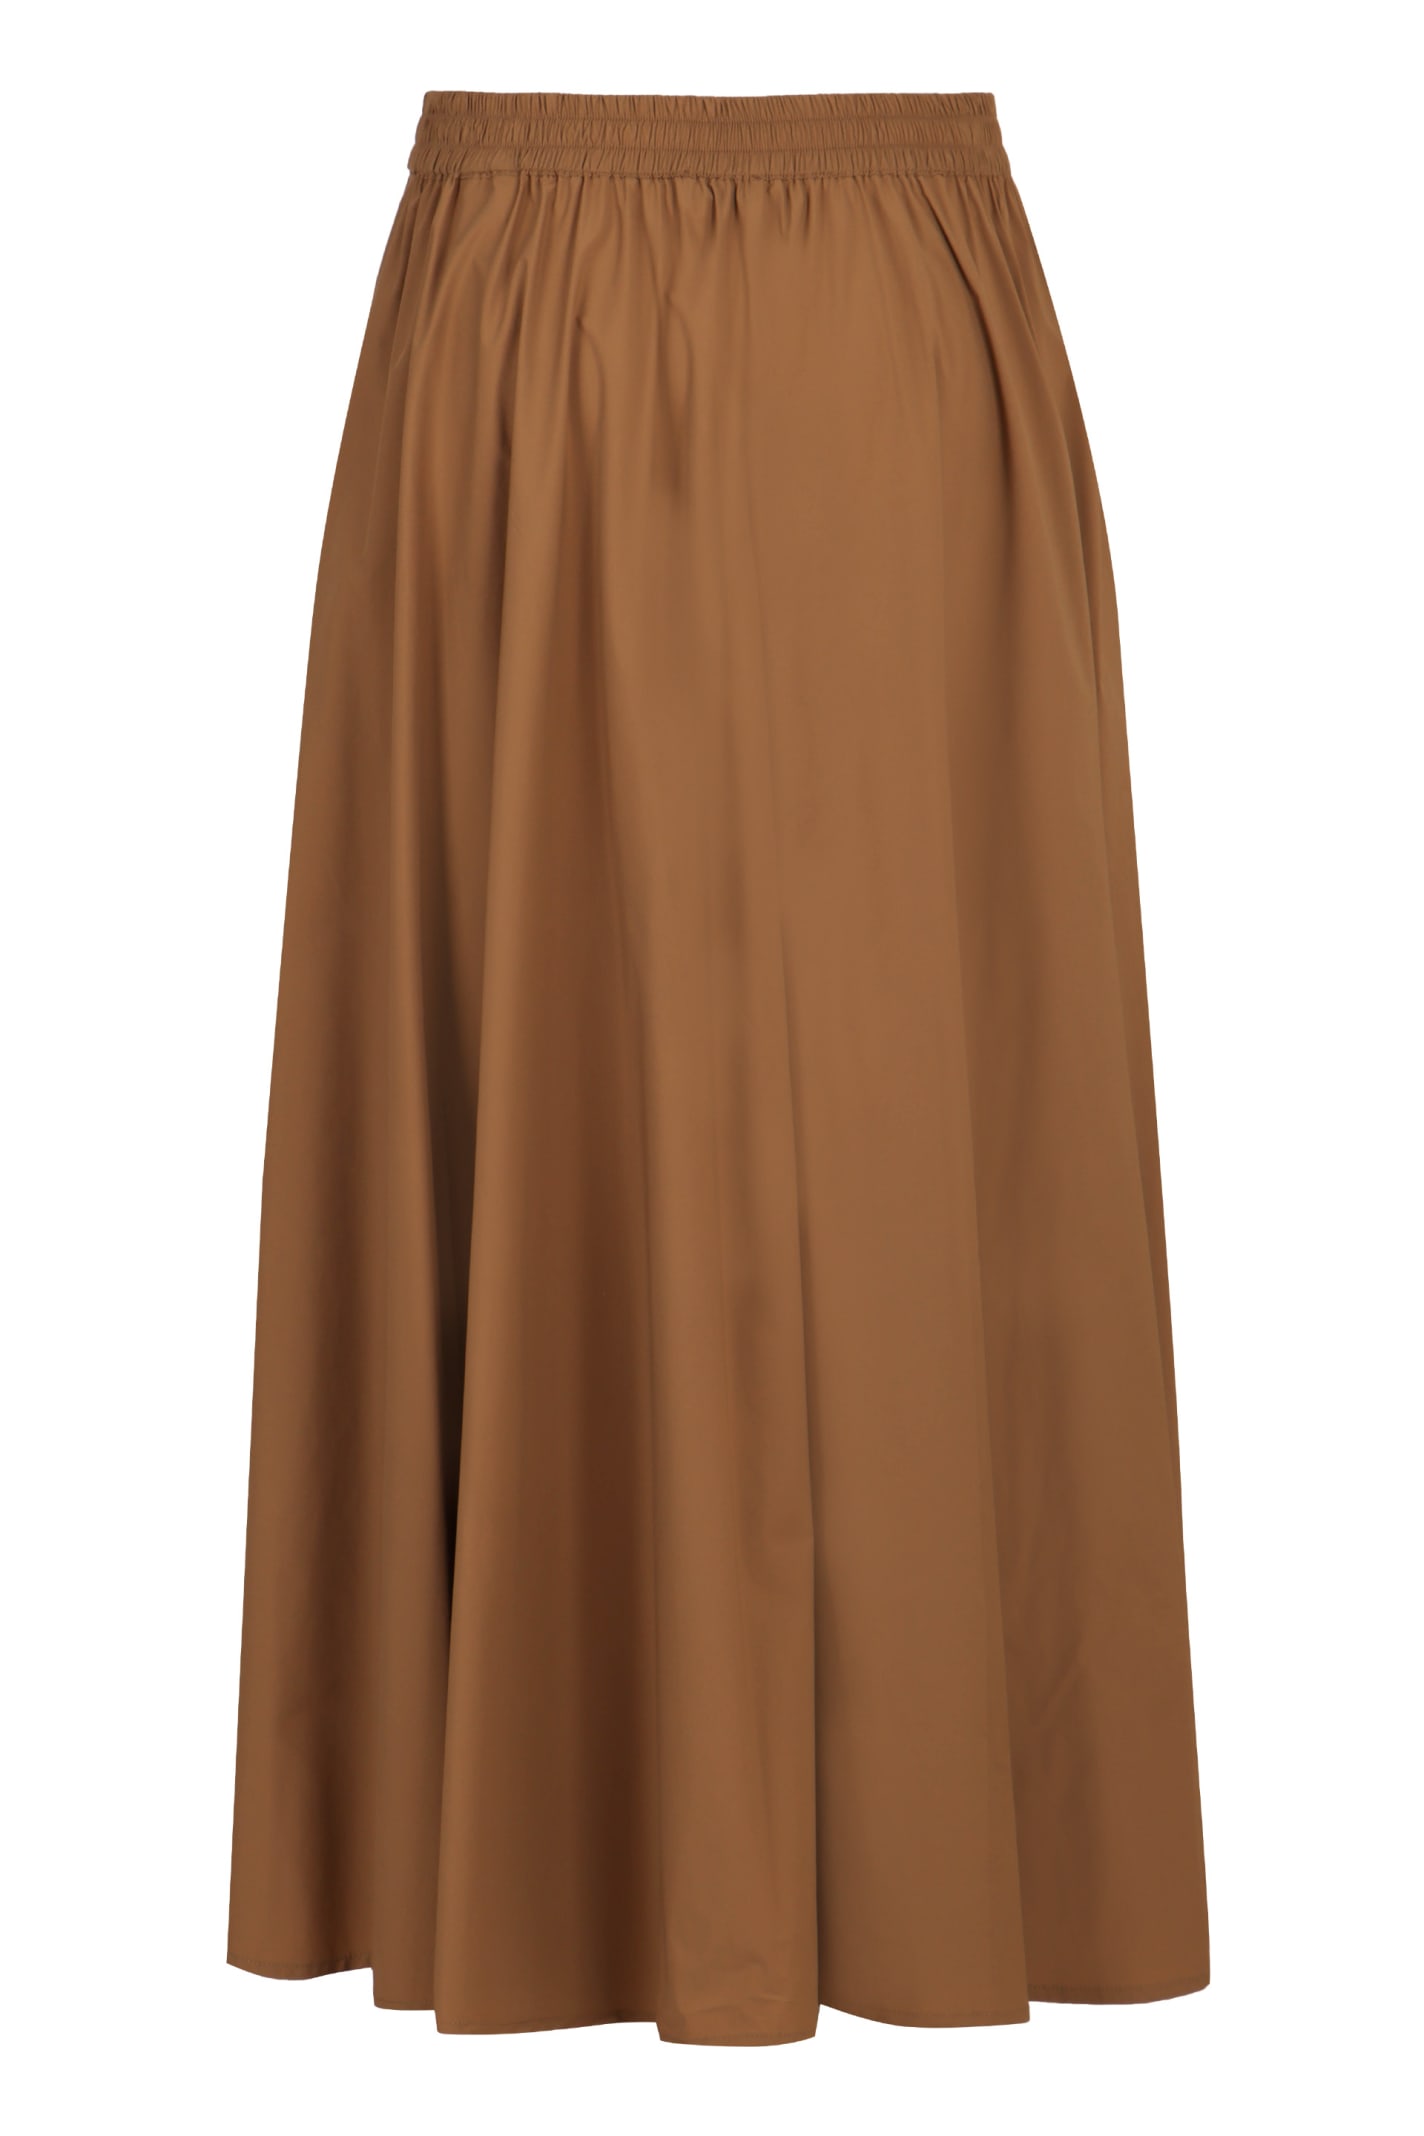 Shop Herno Laced Pelated Skirt In Marrone Ramato